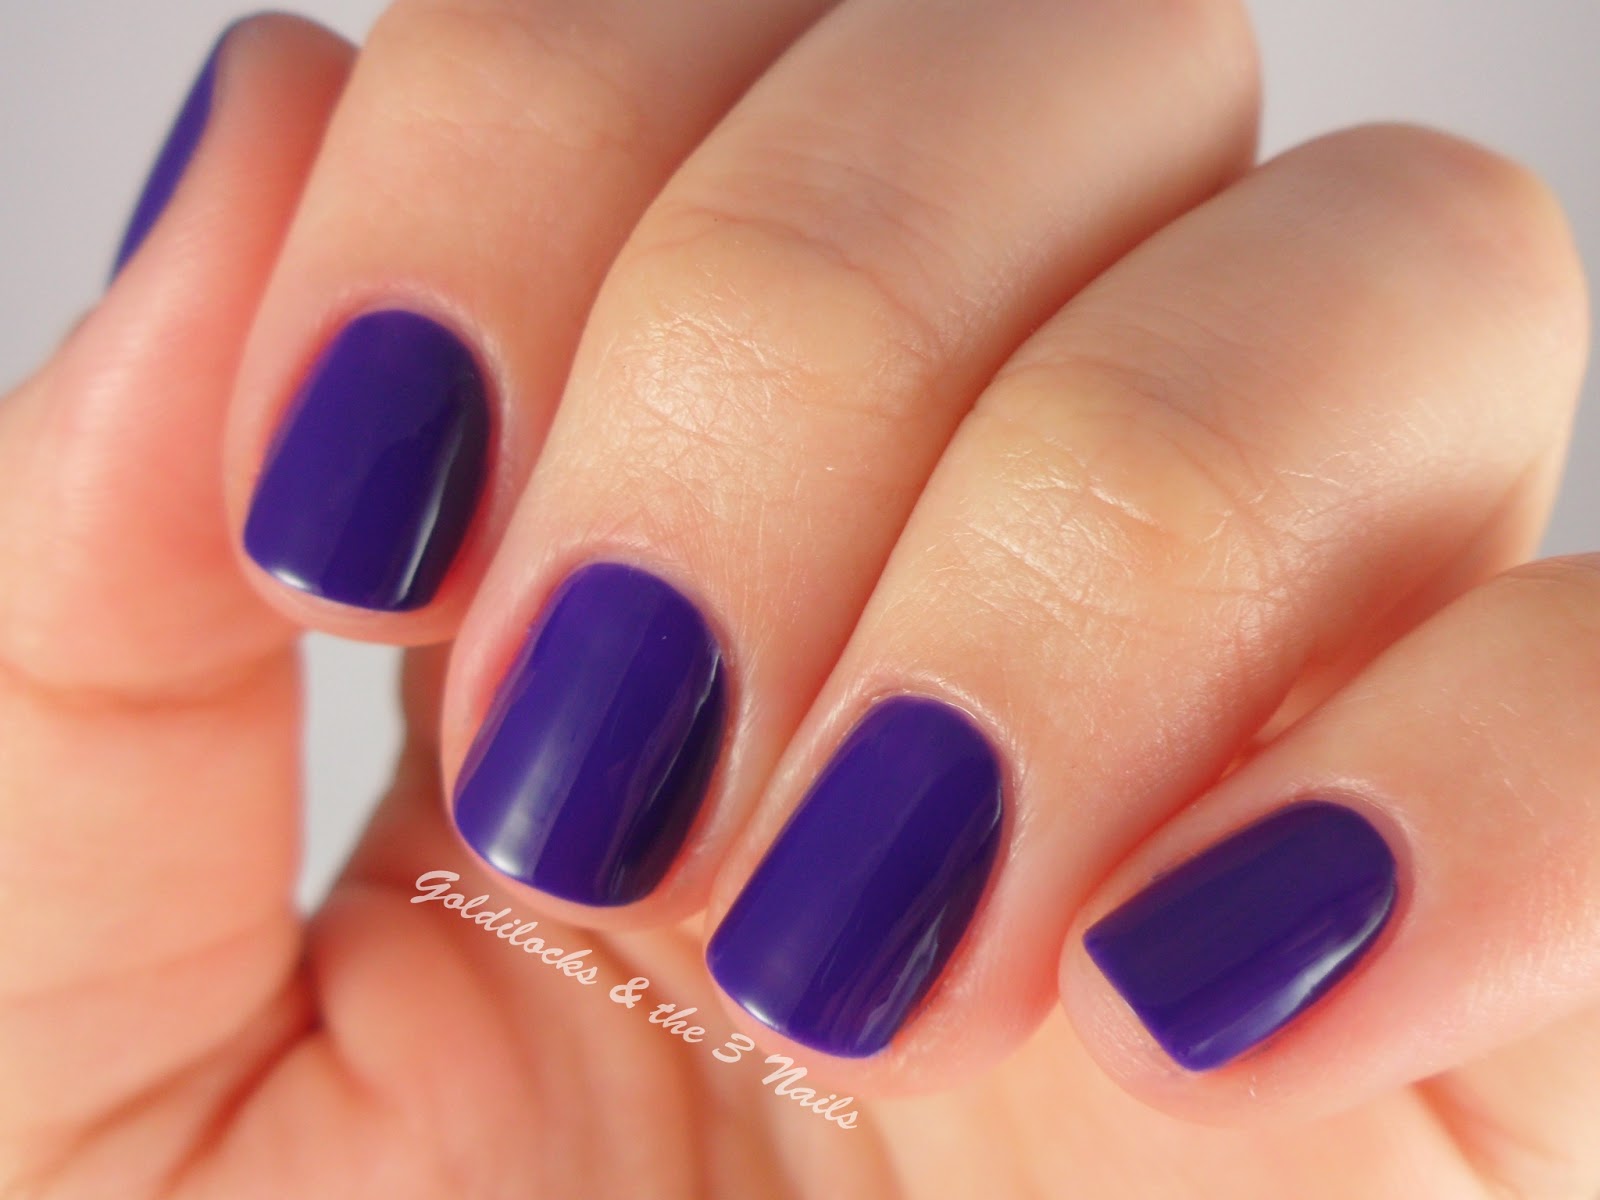 8. OPI Nail Lacquer in "Do You Have This Color in Stock-holm?" - wide 6